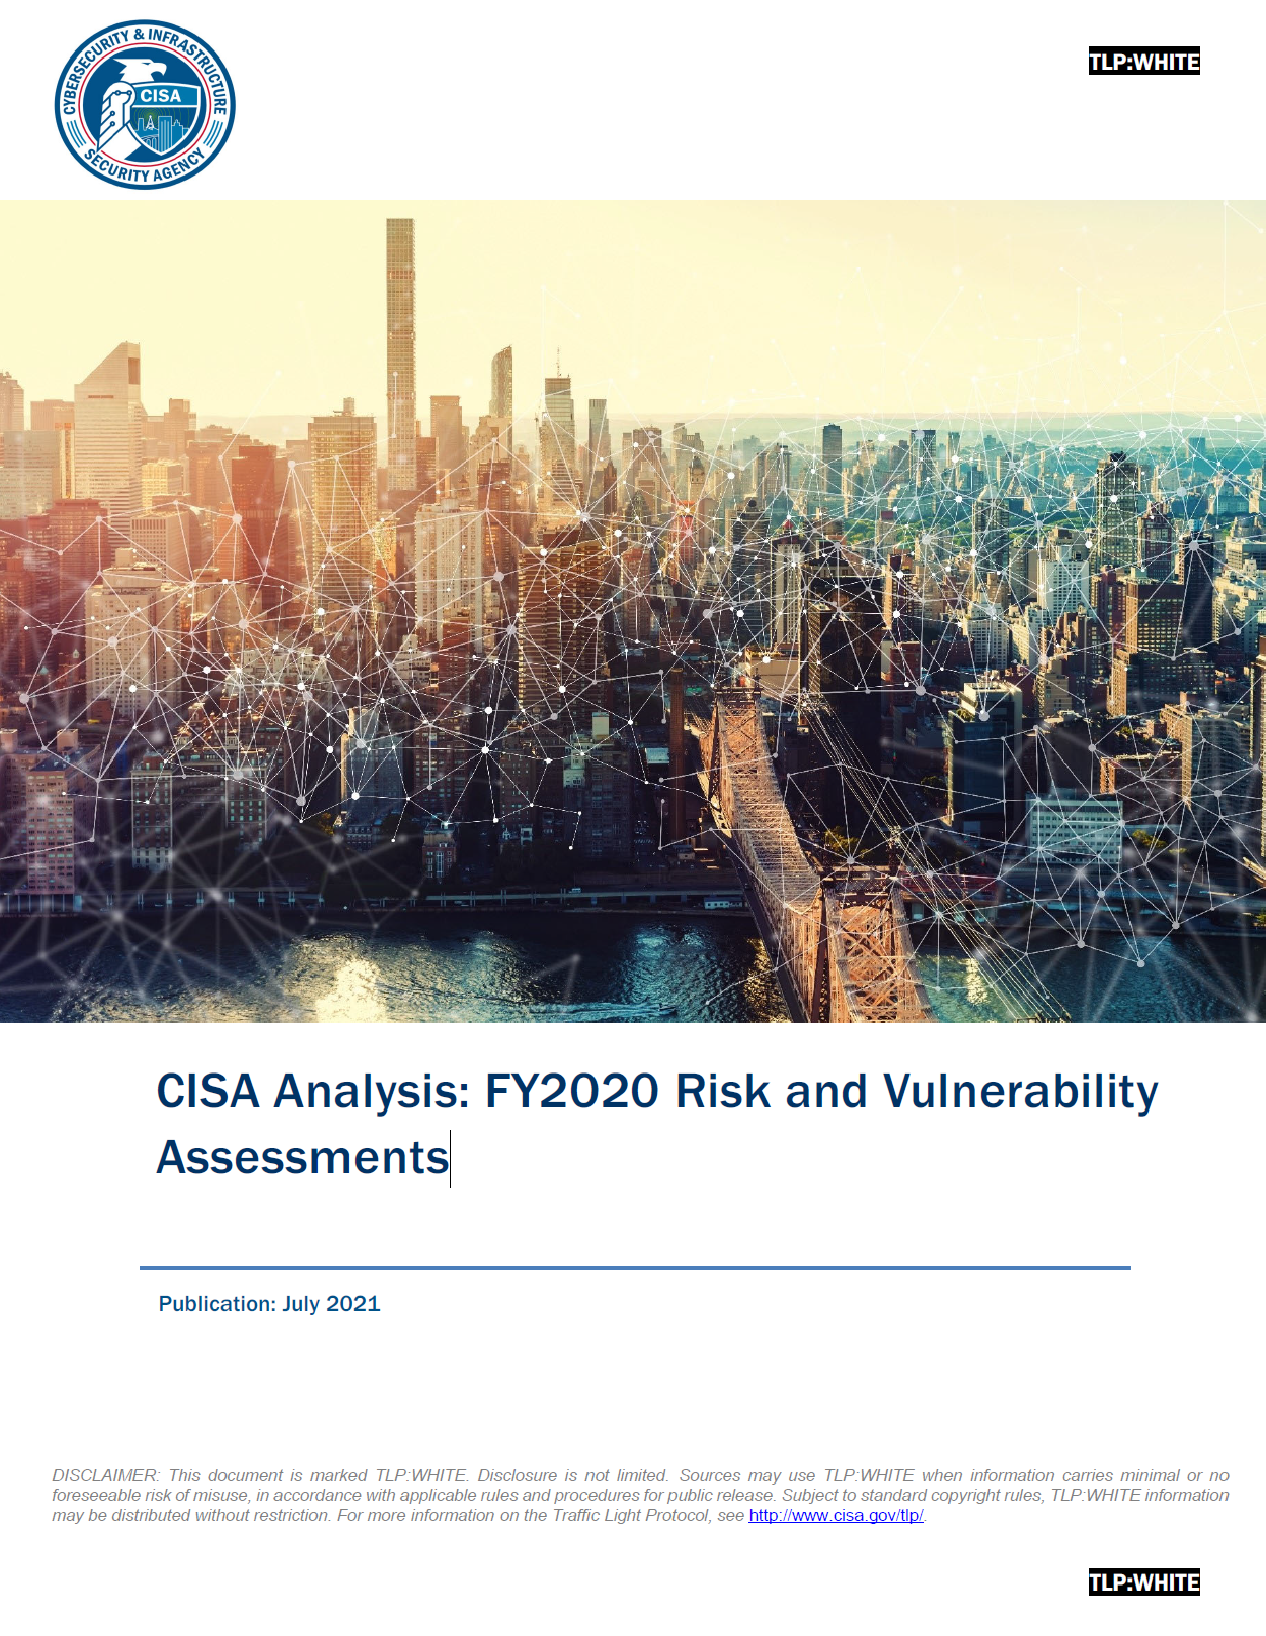 CISA Analysis - FY2020 Risk & Vulnerability Assessments - July 2021